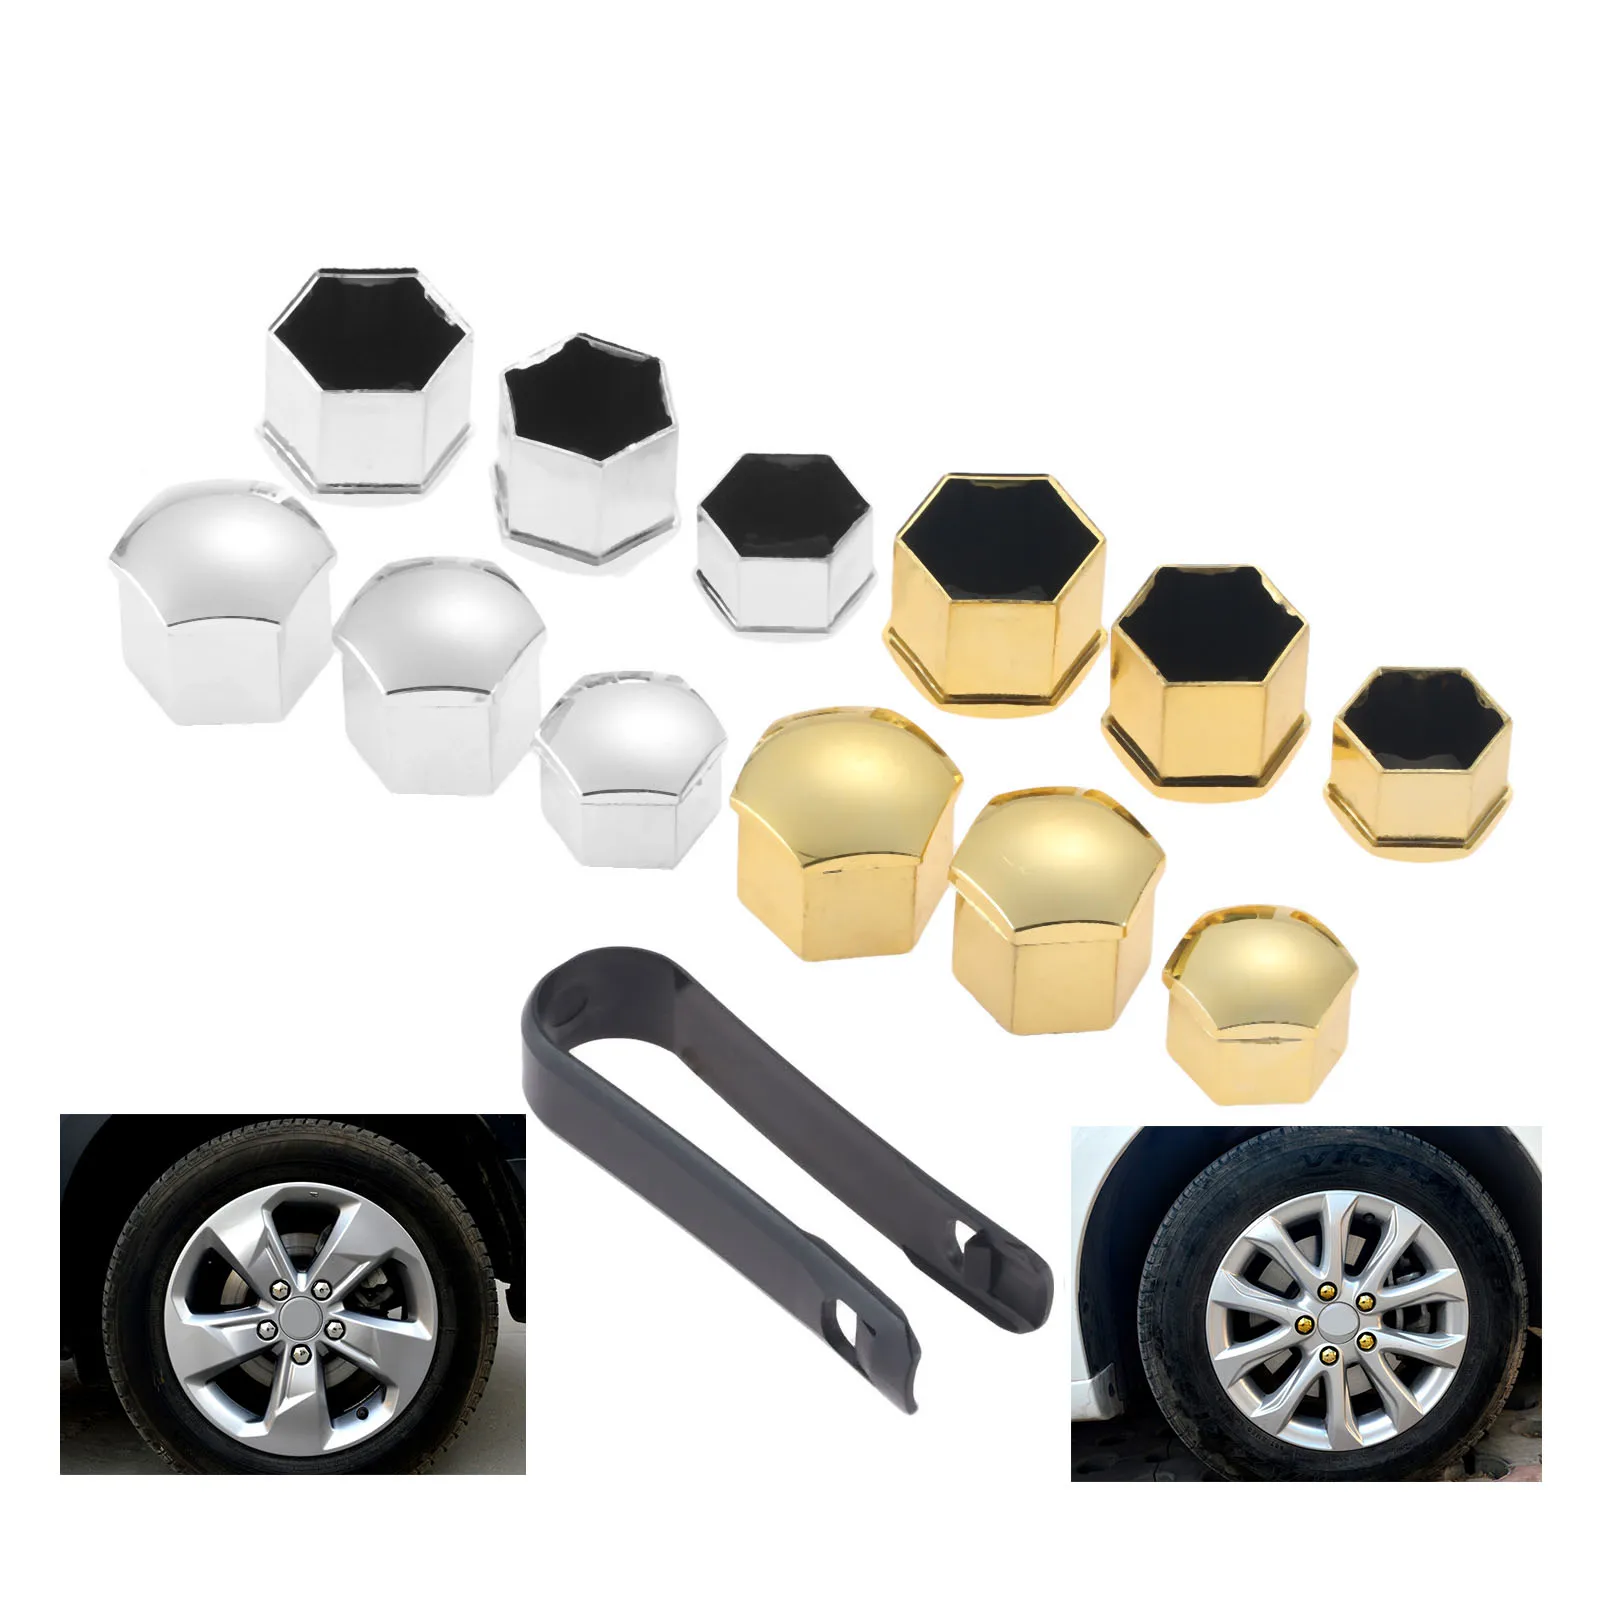 

20Pcs Universal Anti-Rust 17 19 21mm Chrome Glossy ABS Auto Trim Tyre Wheel Nut Screw Bolt Protection Covers Caps Car Styling